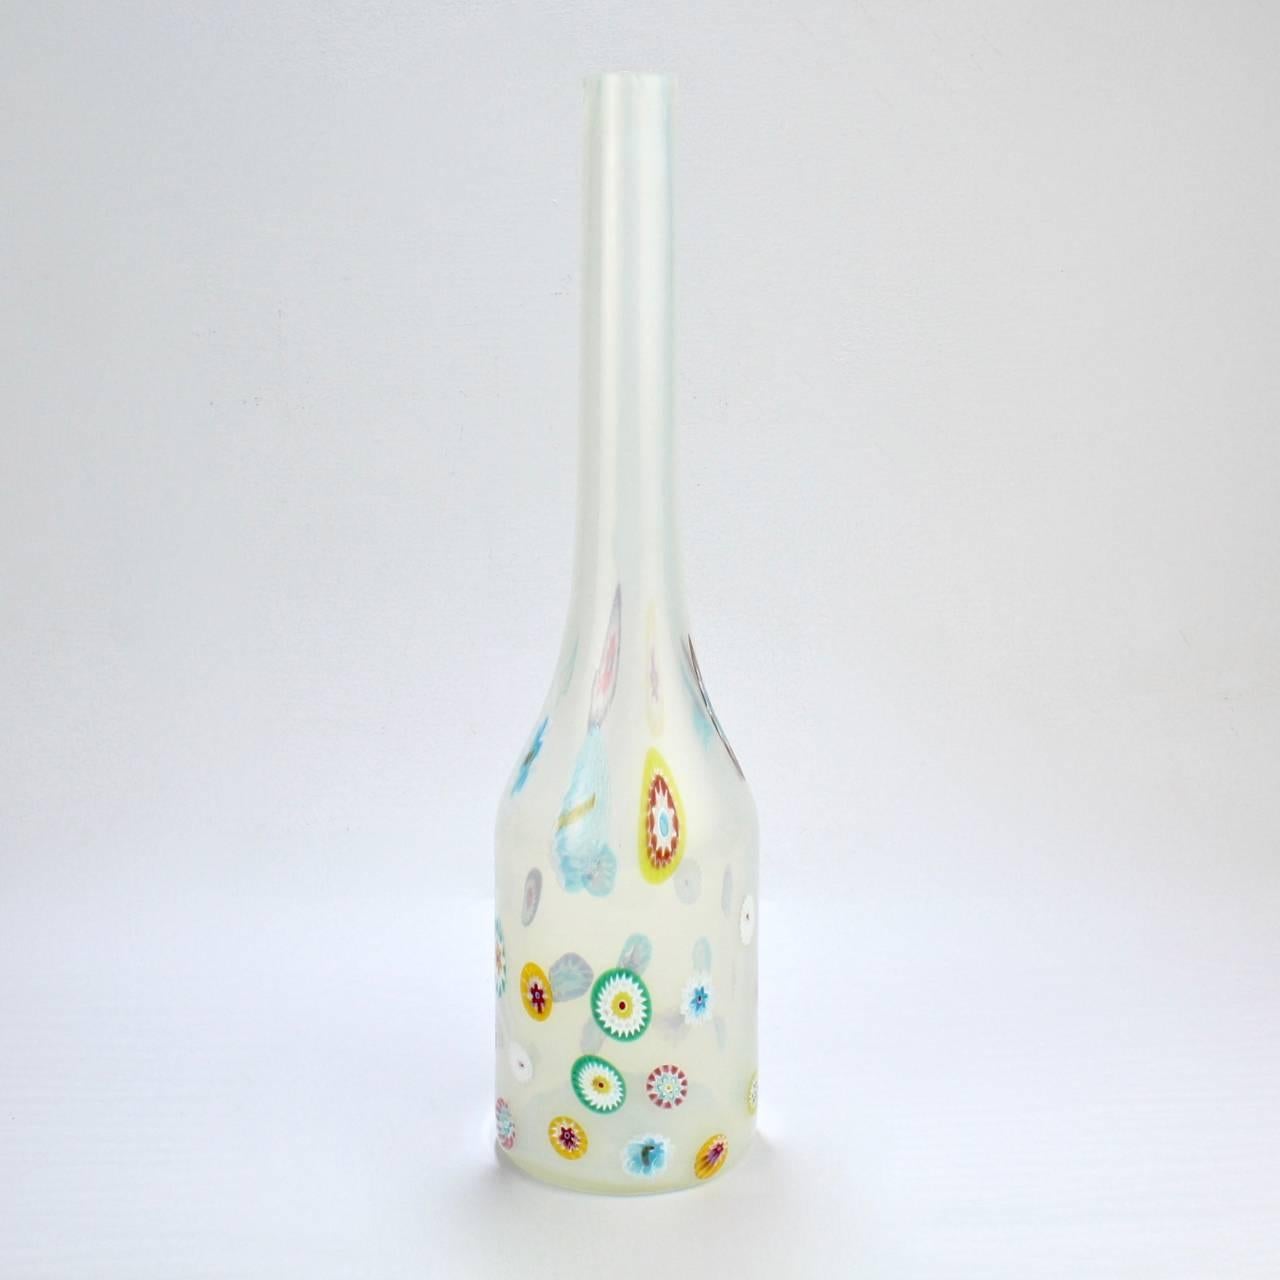 A rare Ermanno Toso white bottle form Venetian glass vase with murrine throughout. 

Of similar form to the bottle vases in Toso's Nerox line.

Base bears a Fratelli Toso, made in Murano, label.

Measure: Height ca. 15 in.

 

 